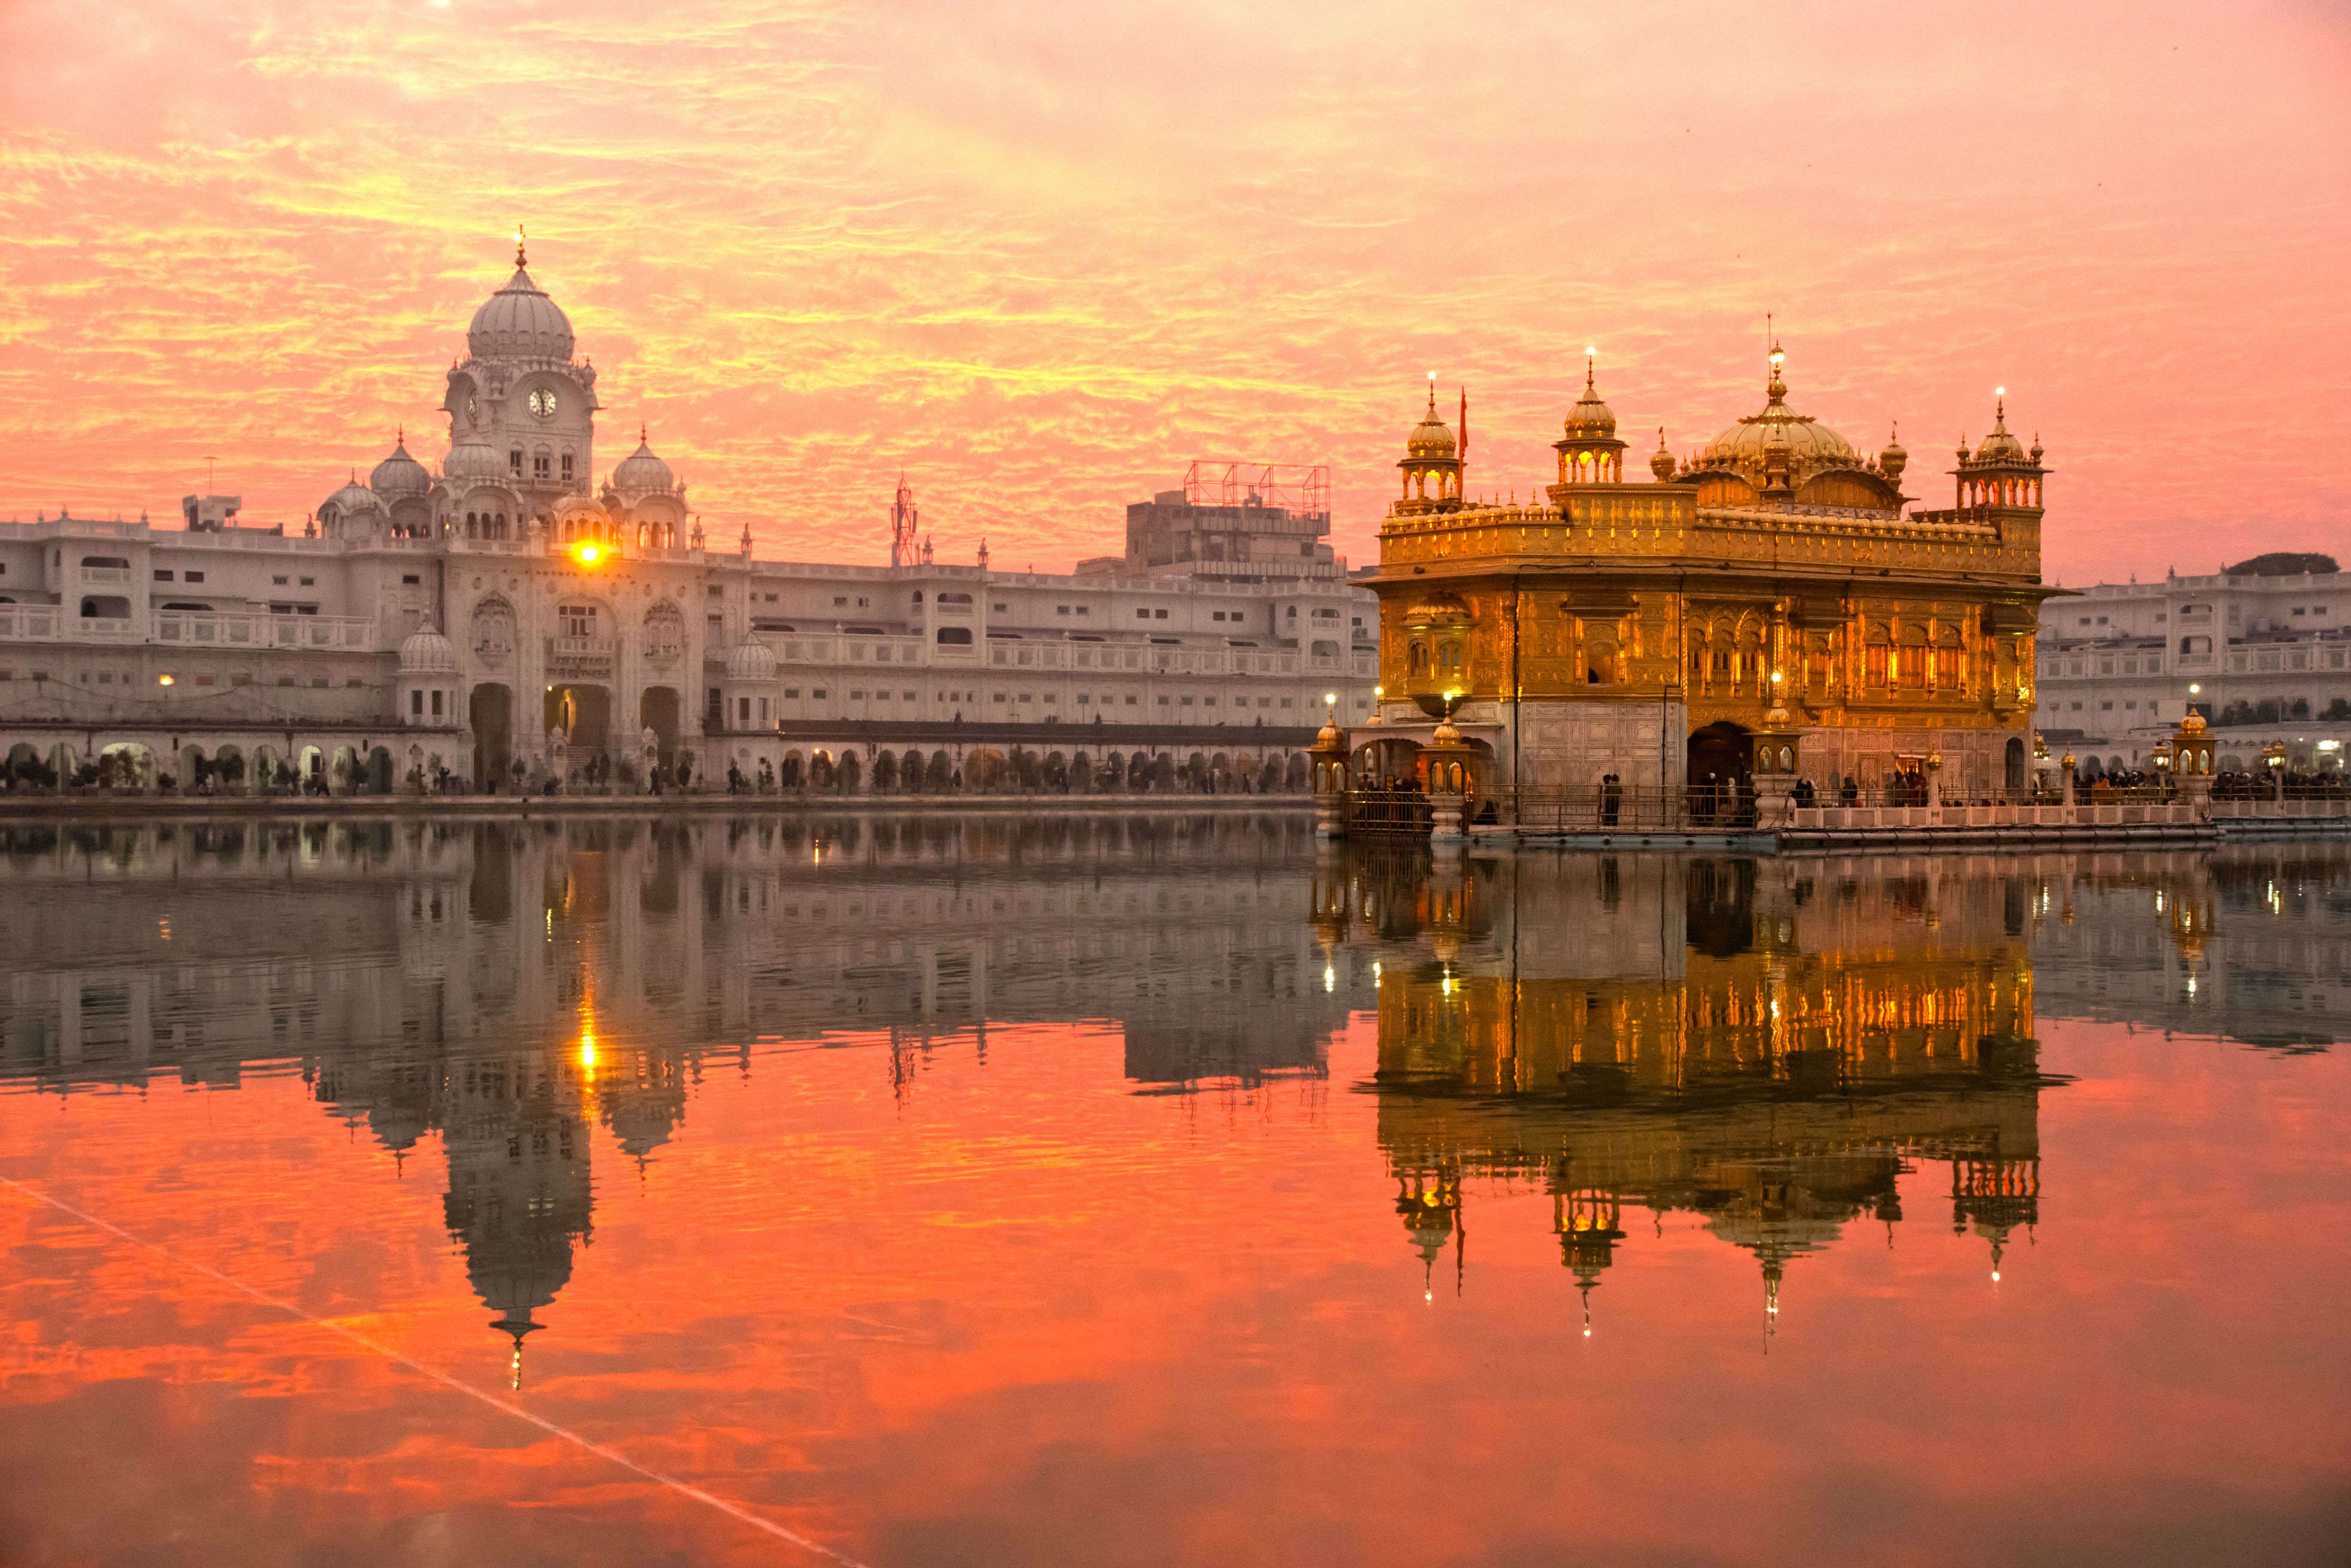 IRCTC Amritsar tour package from New Delhi is a great opportunity for travellers